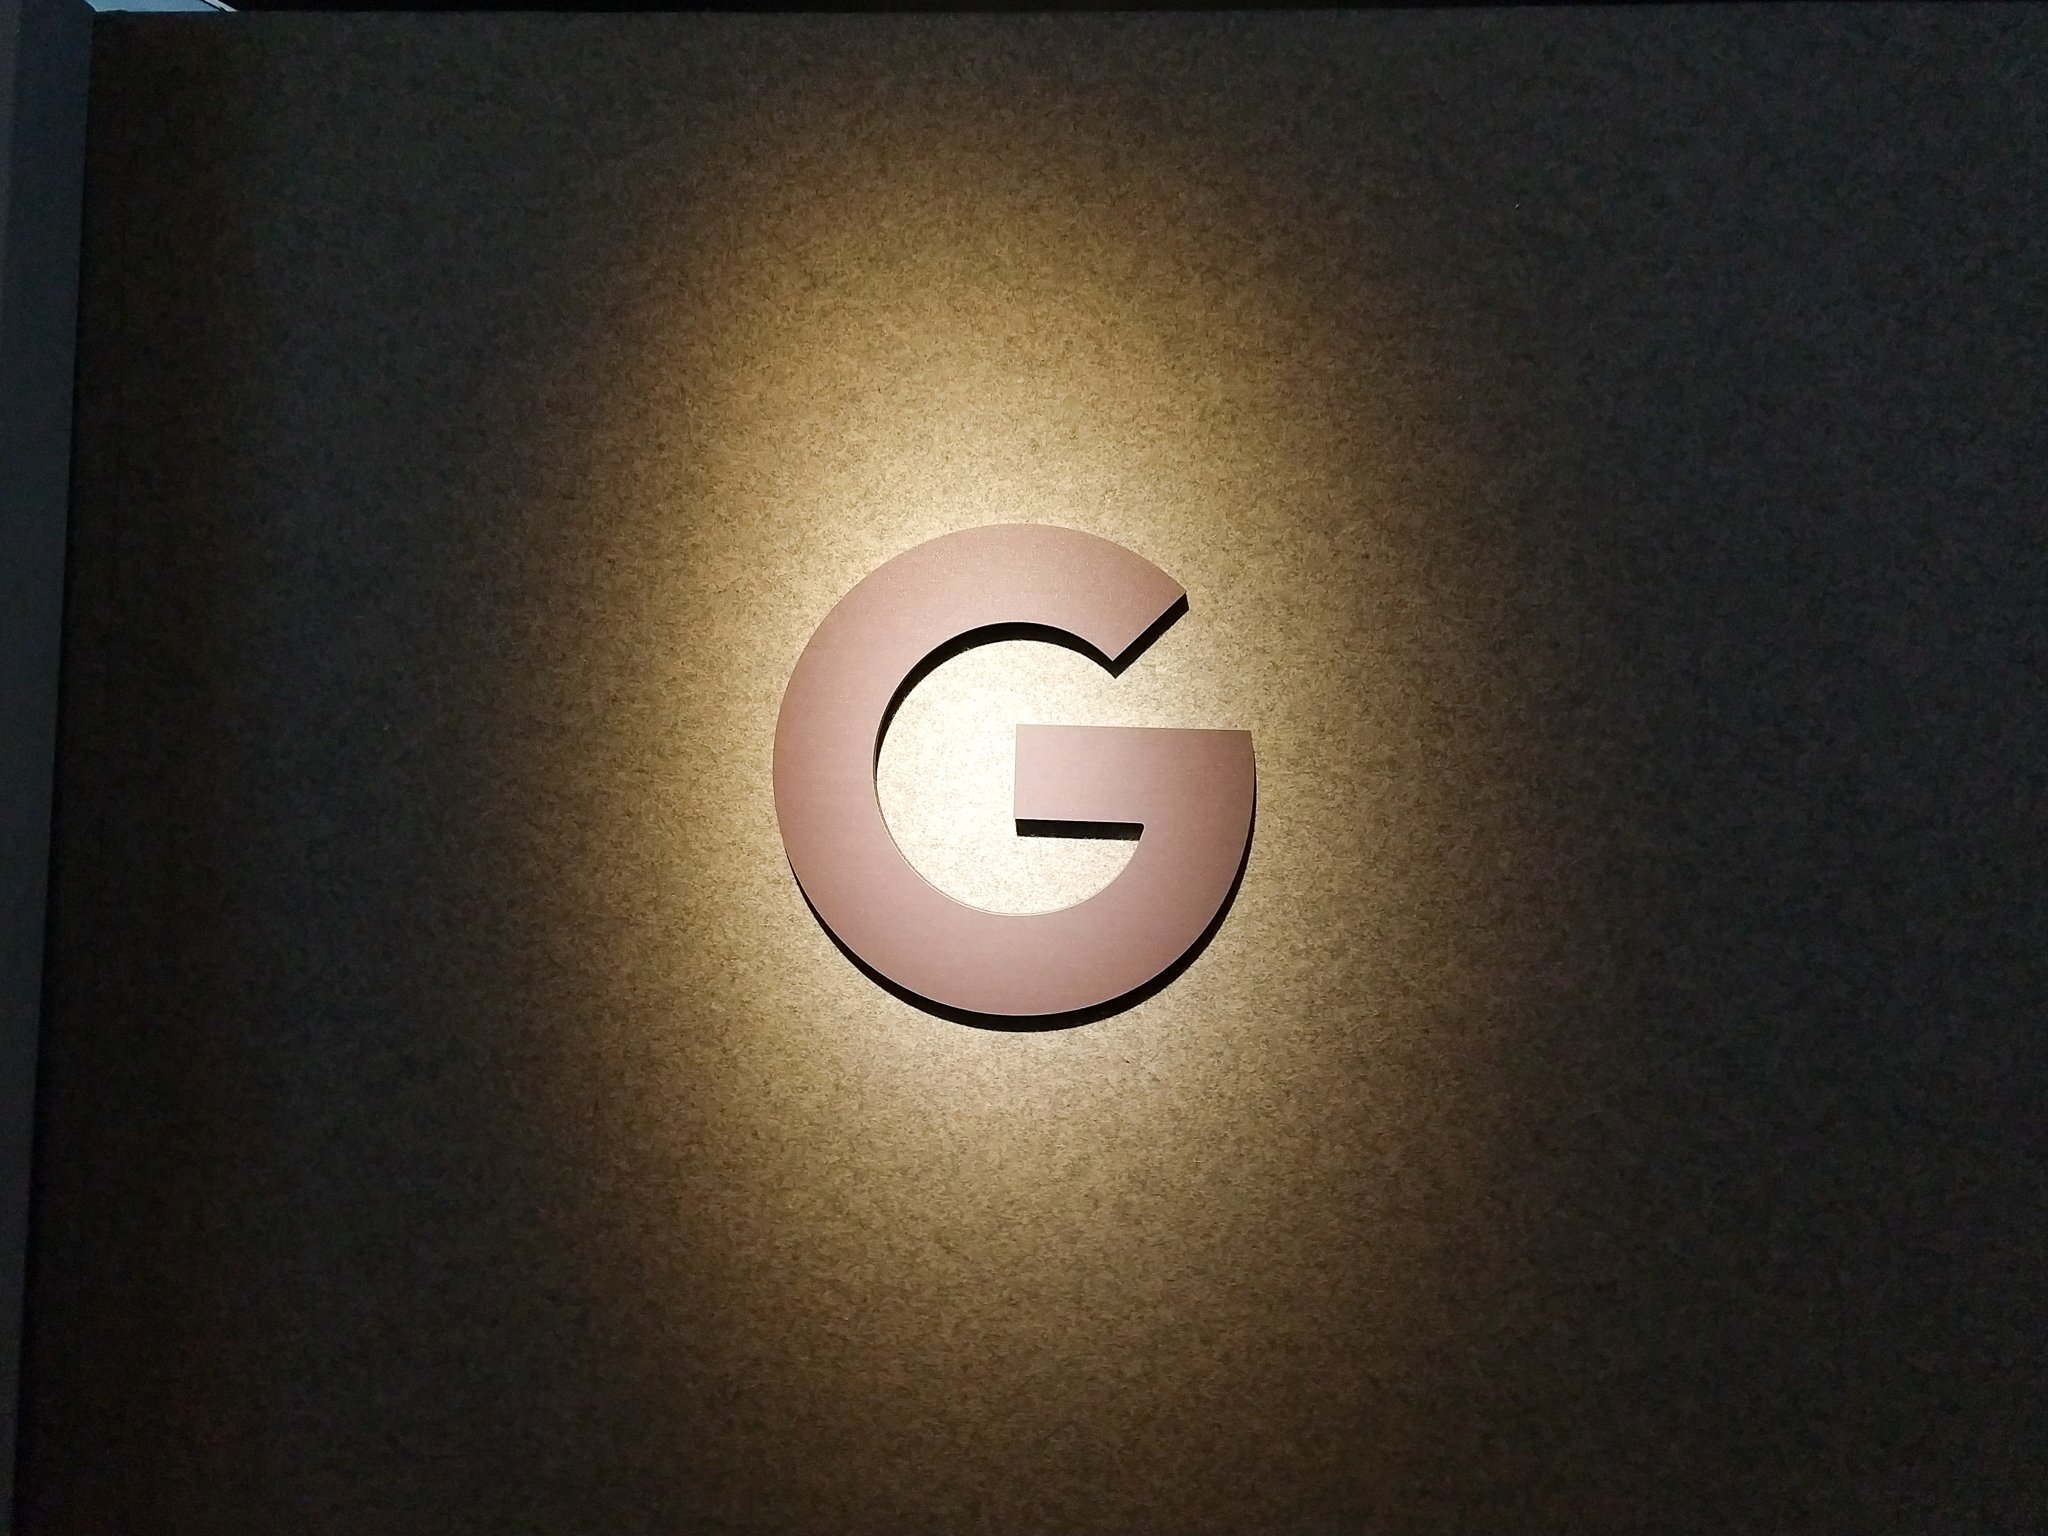 The Google logo in black and white under a sepia shadow